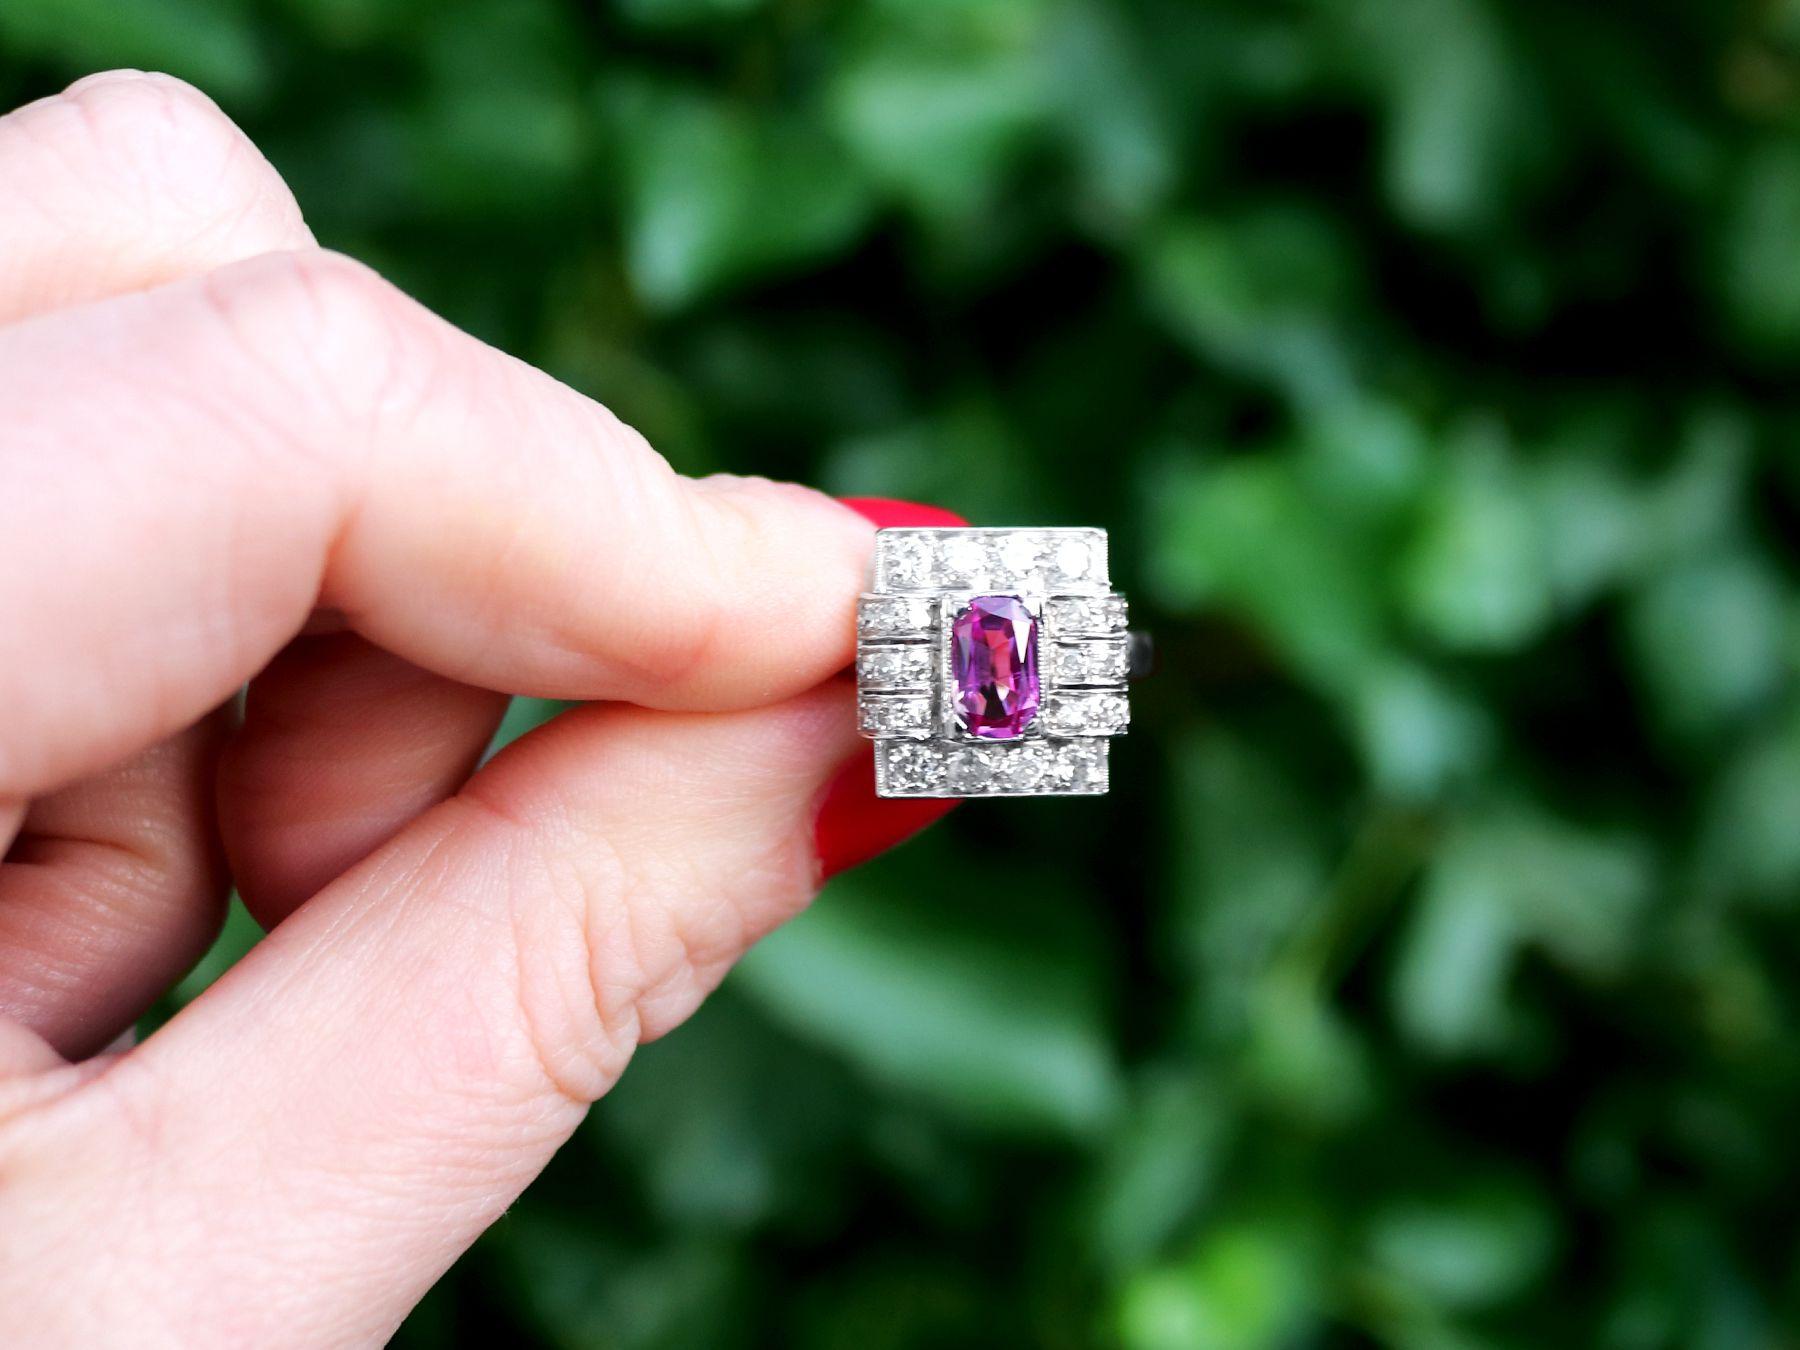 A fine Art Deco 1.45 carat pink sapphire and 0.96 carat diamond, 18 karat white gold and platinum set cluster ring; part of our diverse vintage jewelry collections.

This fine and impressive pink sapphire cocktail ring has been crafted in 18k white